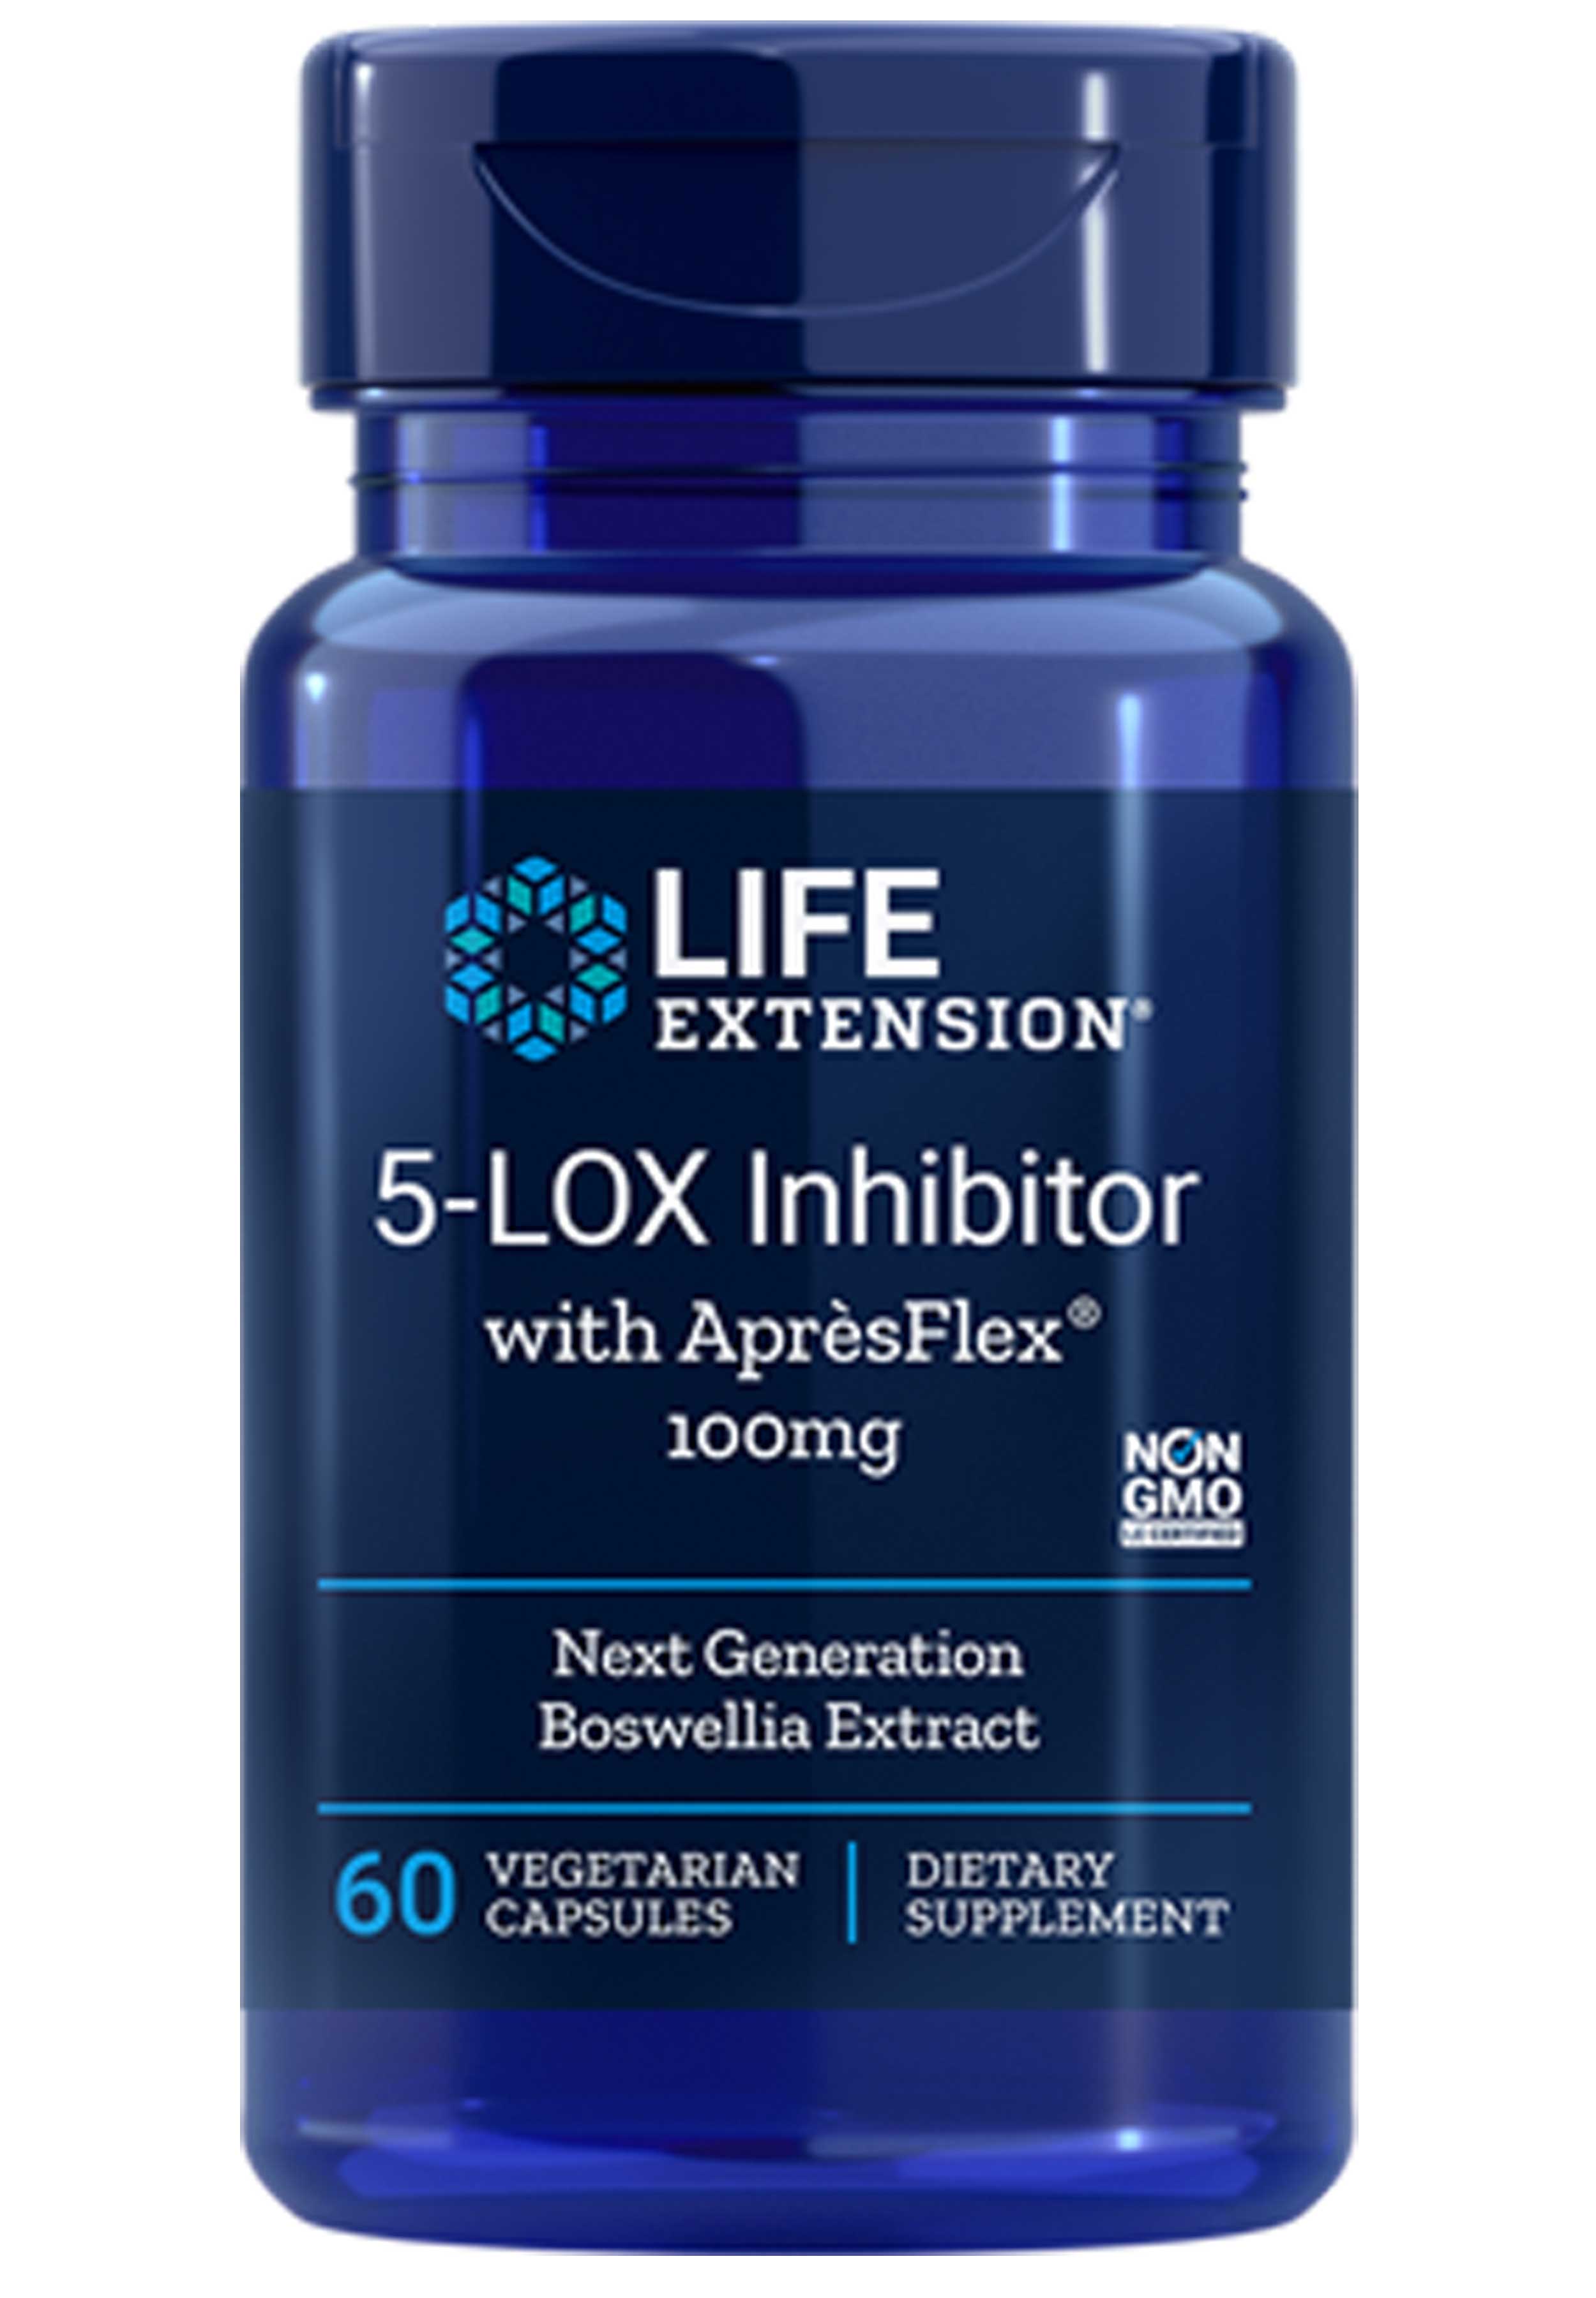 Life Extension 5-LOX Inhibitor with AprèsFlex